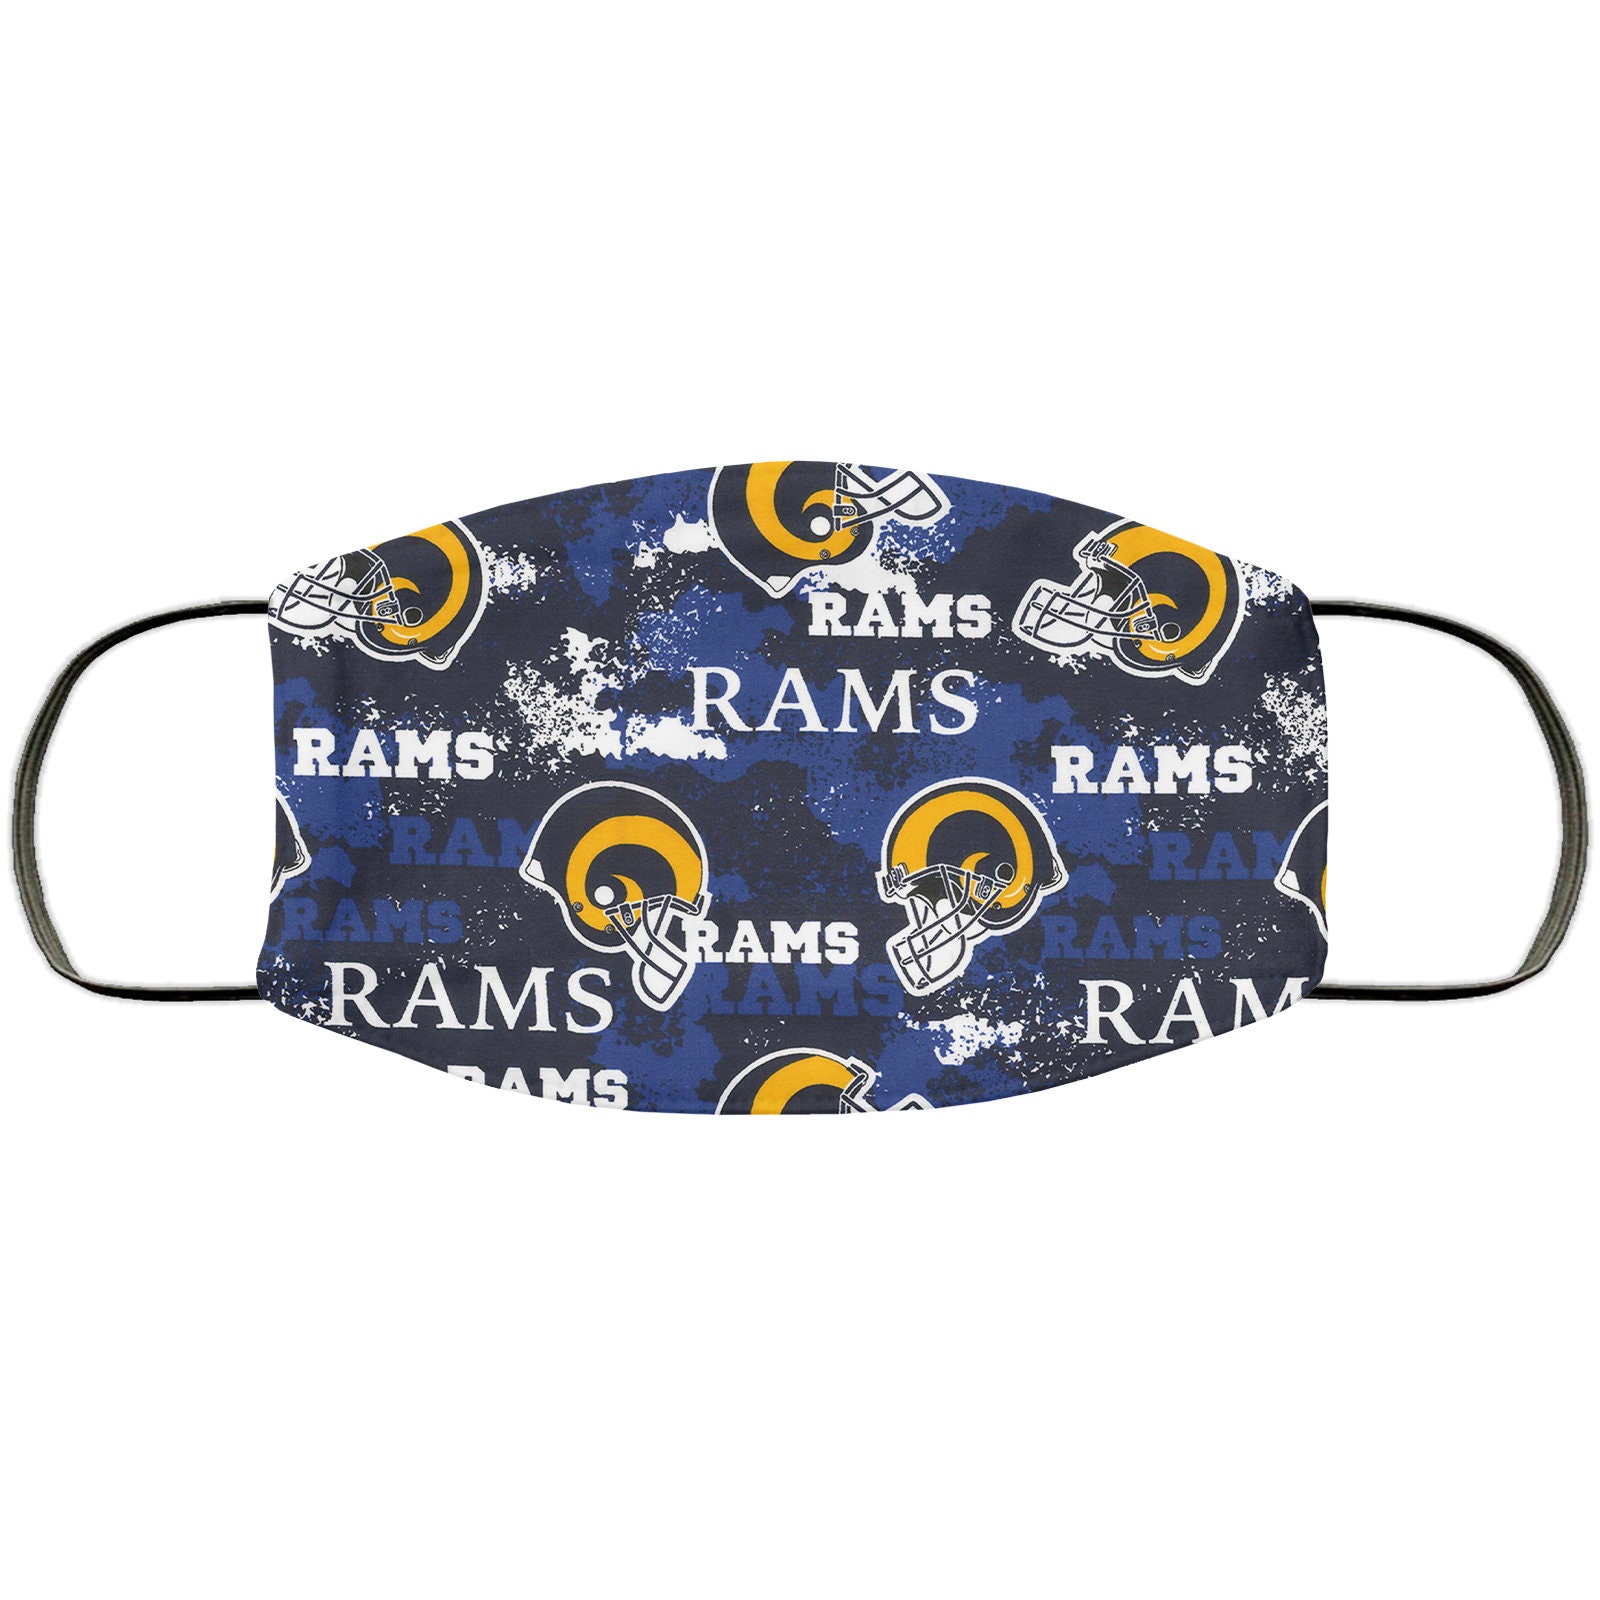 Los Angeles Rams Grunge Face Mask | Unisex 3 Layer Facemask, Adult Kid Mask, Washable & Reusable Mask, Fast Shipping Made in Usa